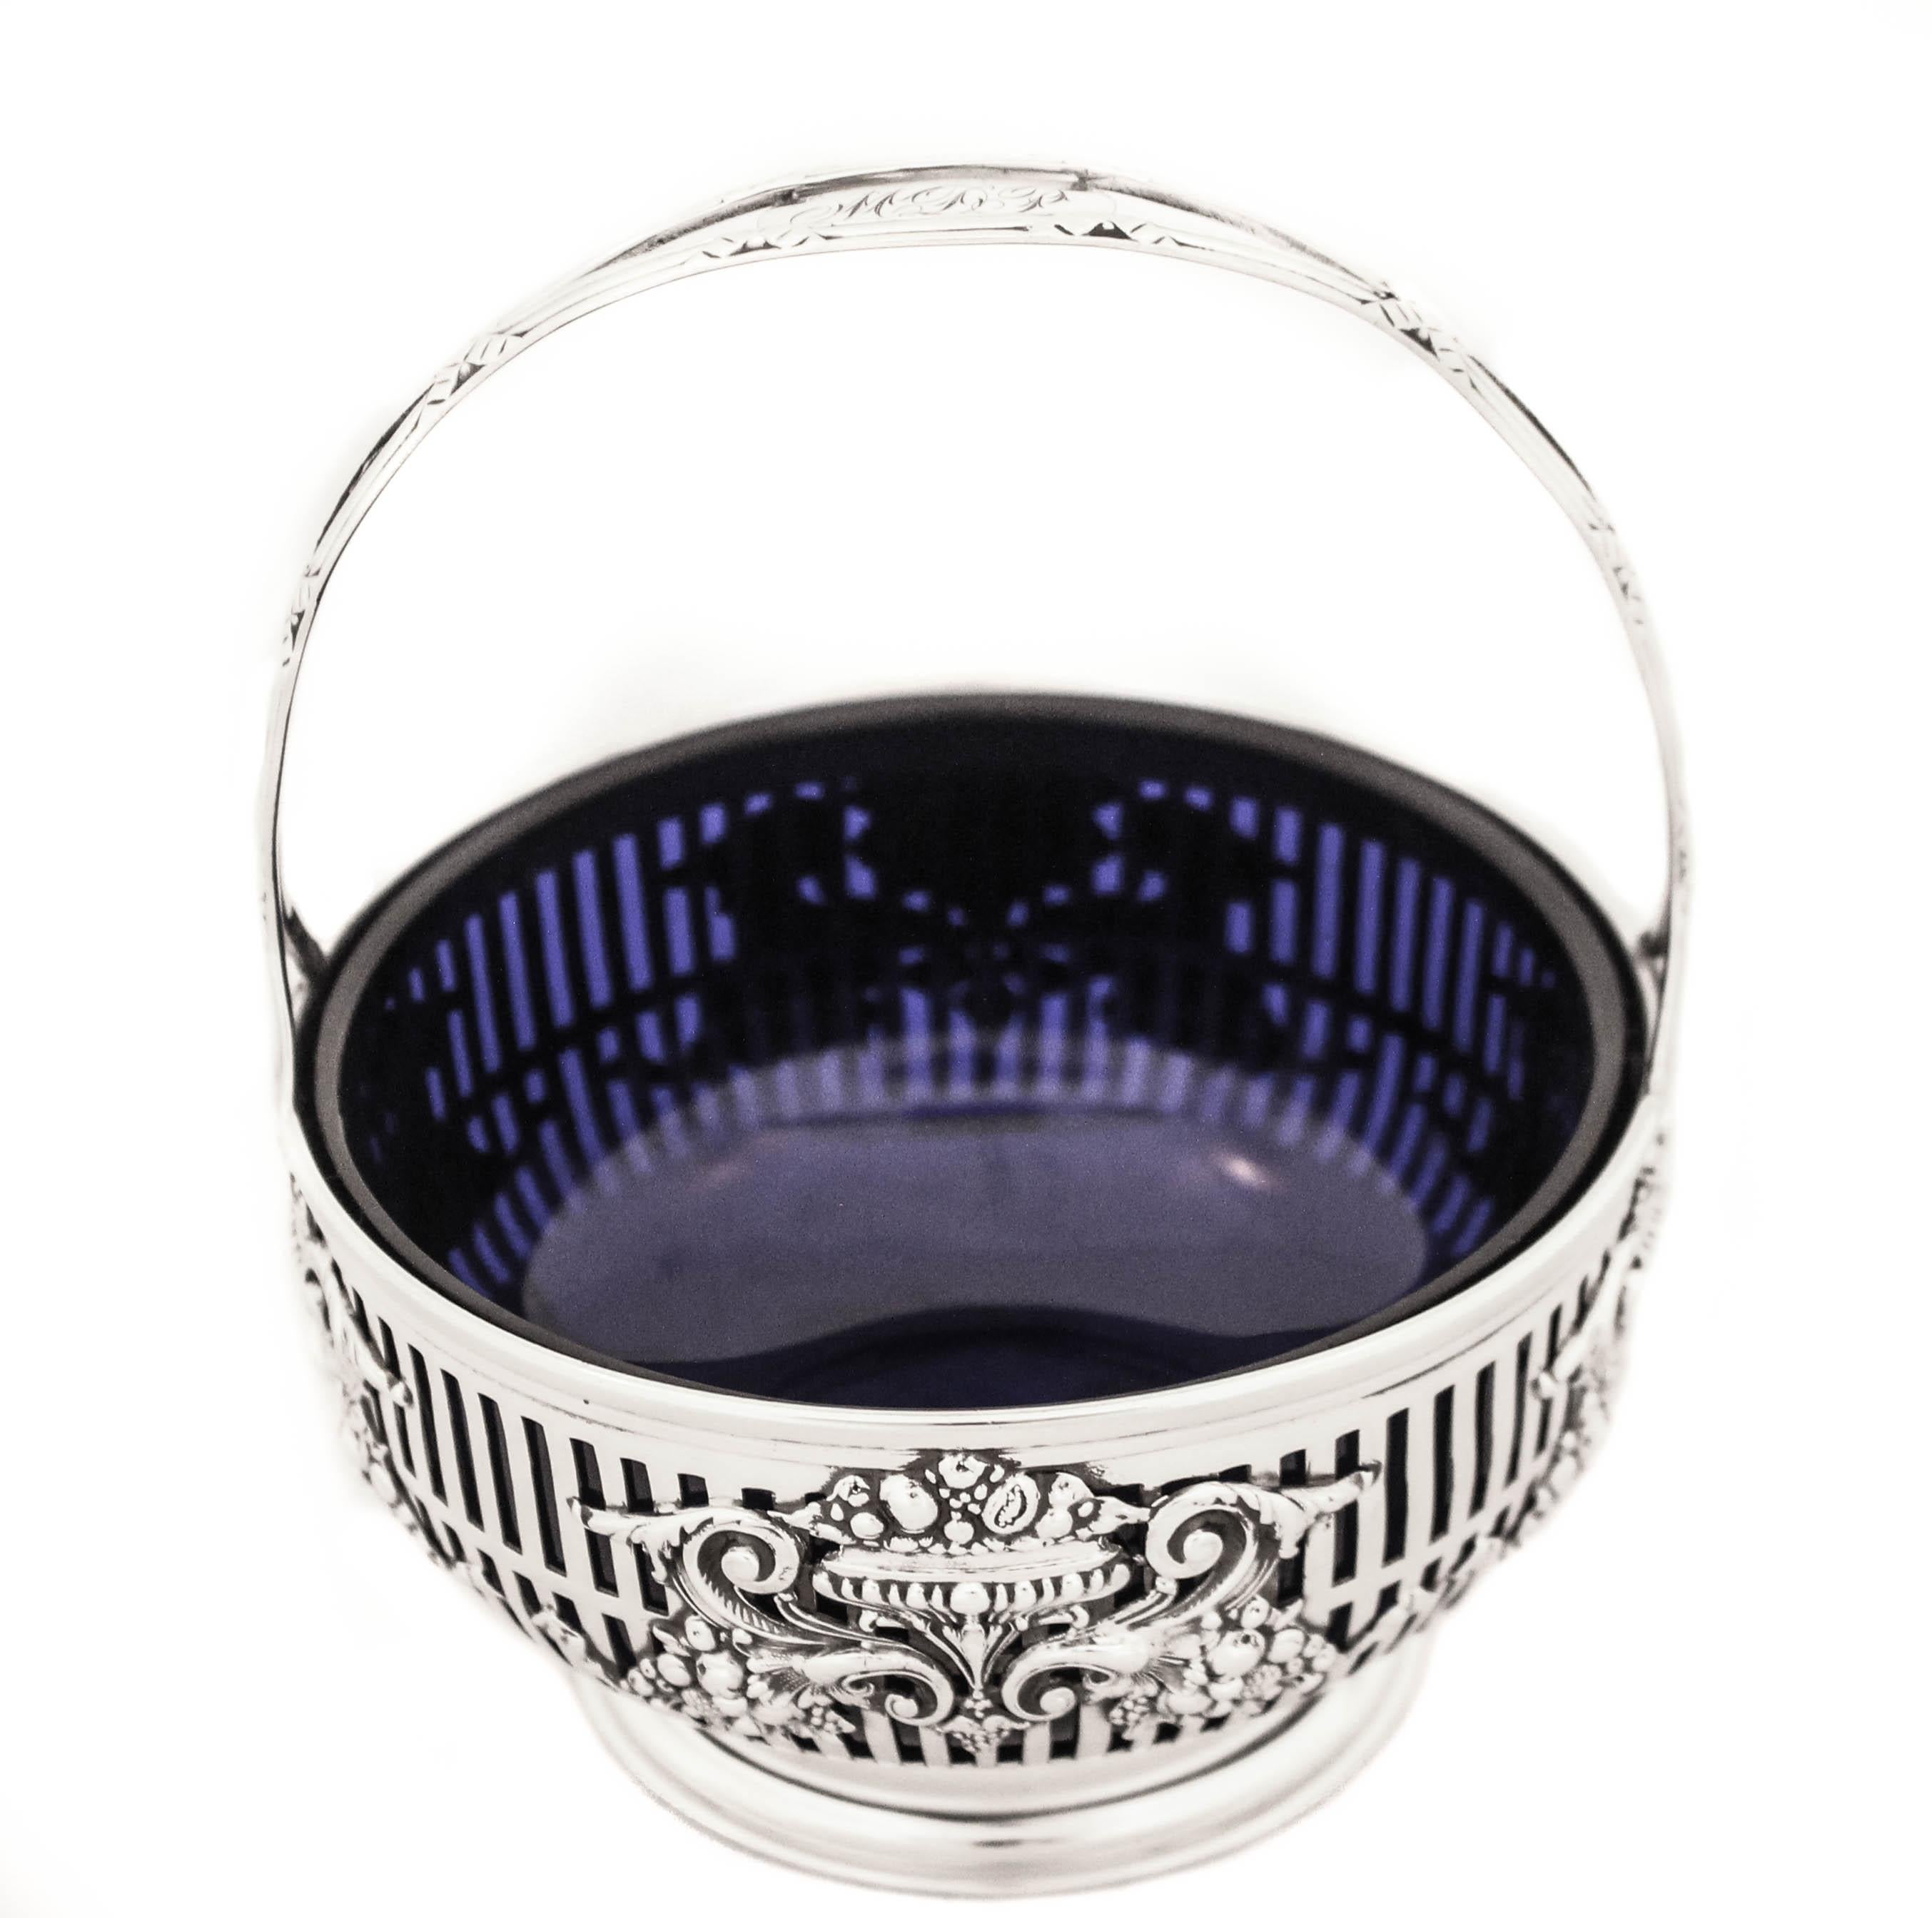 We are delighted to offer you this sterling silver basket with a cobalt blue liner. An elaborate pattern of clustered fruit and flowers decorate the sides of the basket. The cobalt glass pops through the cutout design. The handle is stationary and